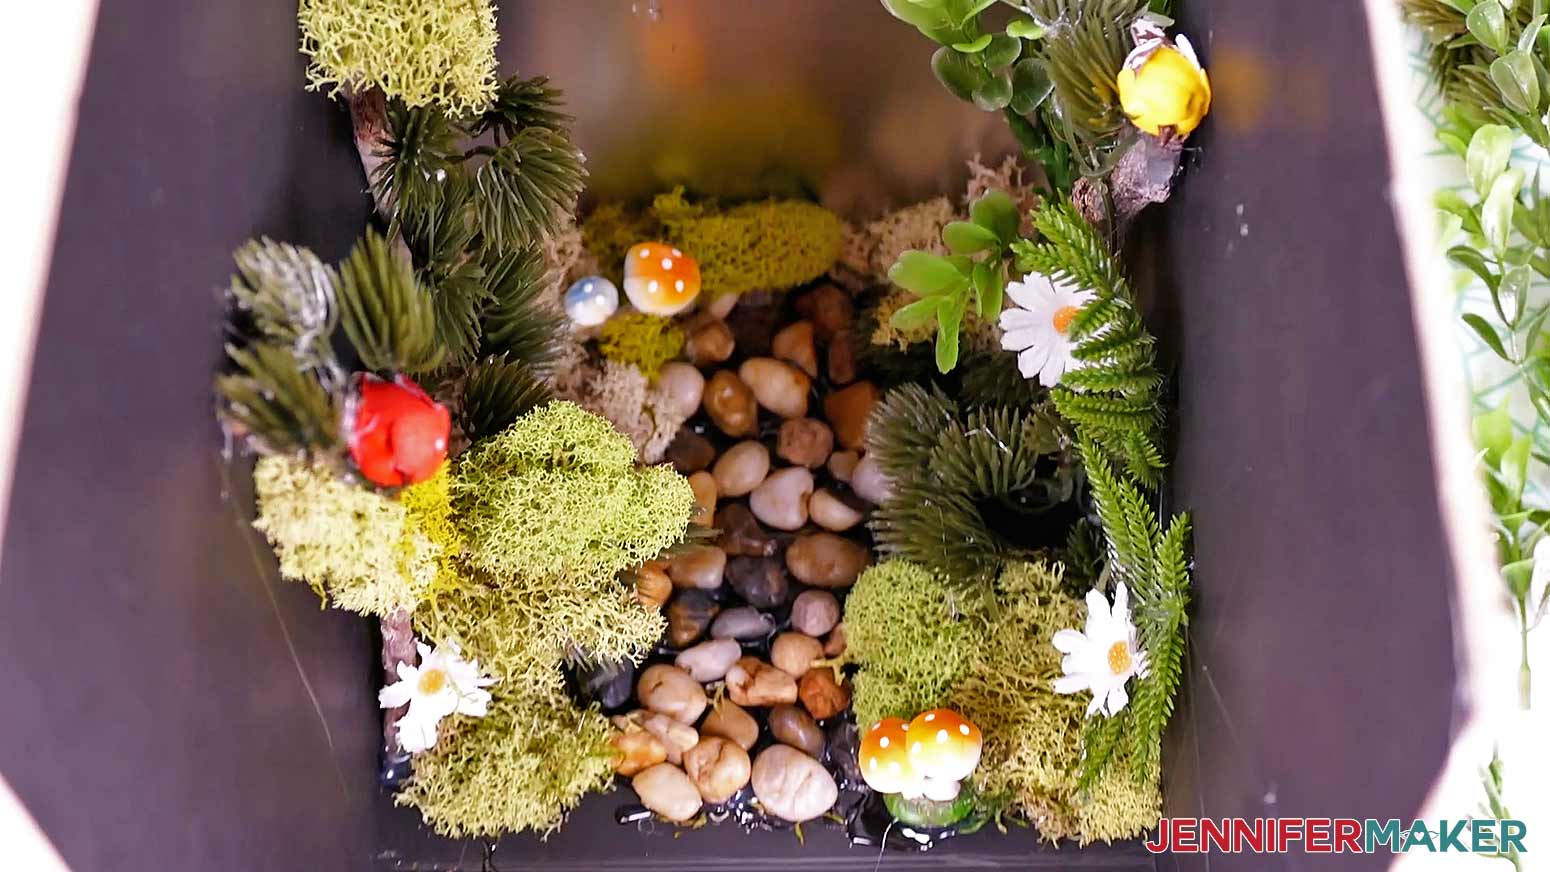 Rocks, branches, moss, floral stem pieces, and miniatures attached to the inside of the diy book nook